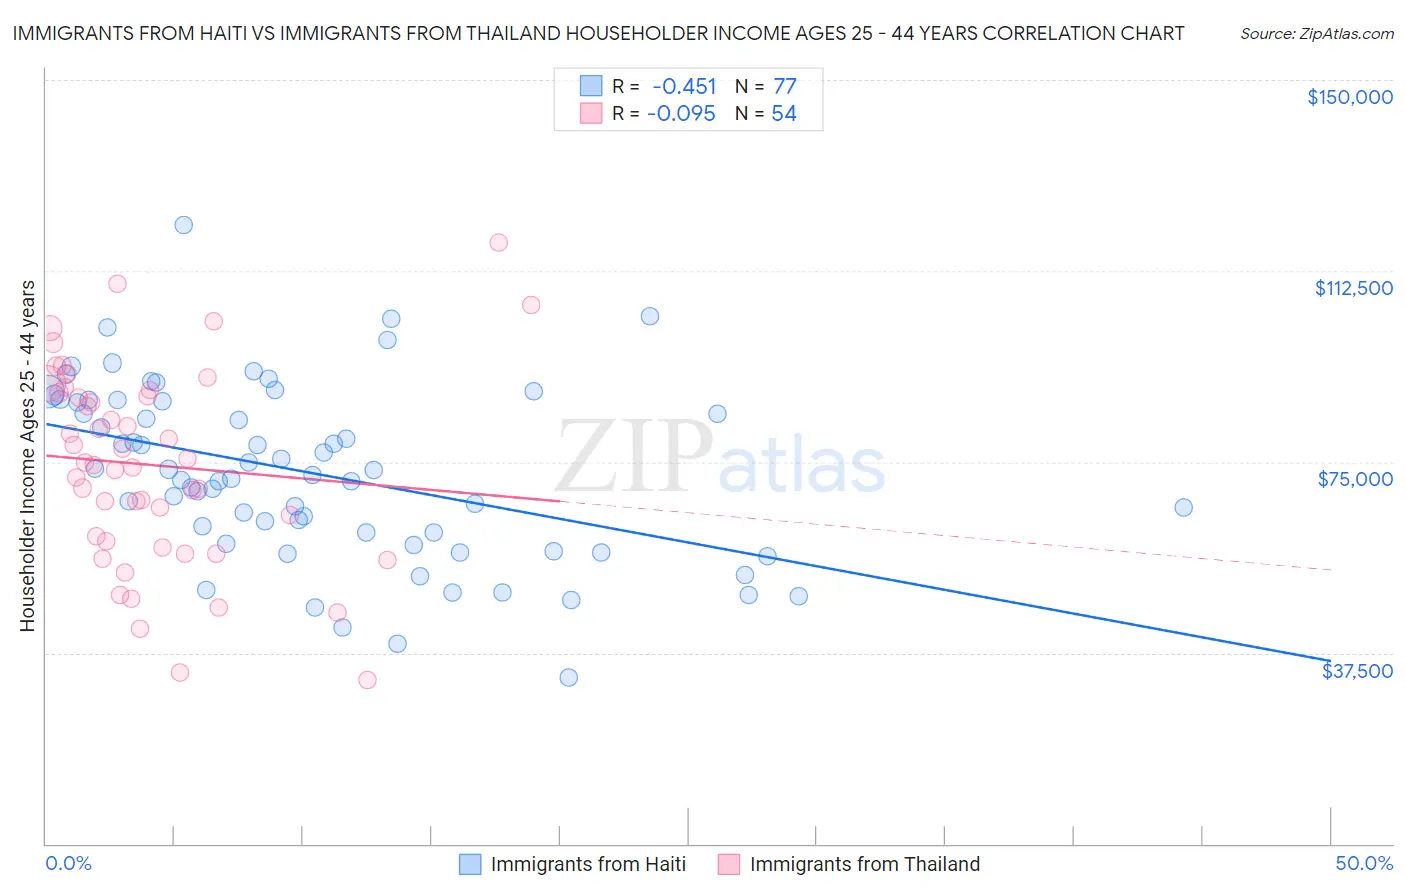 Immigrants from Haiti vs Immigrants from Thailand Householder Income Ages 25 - 44 years